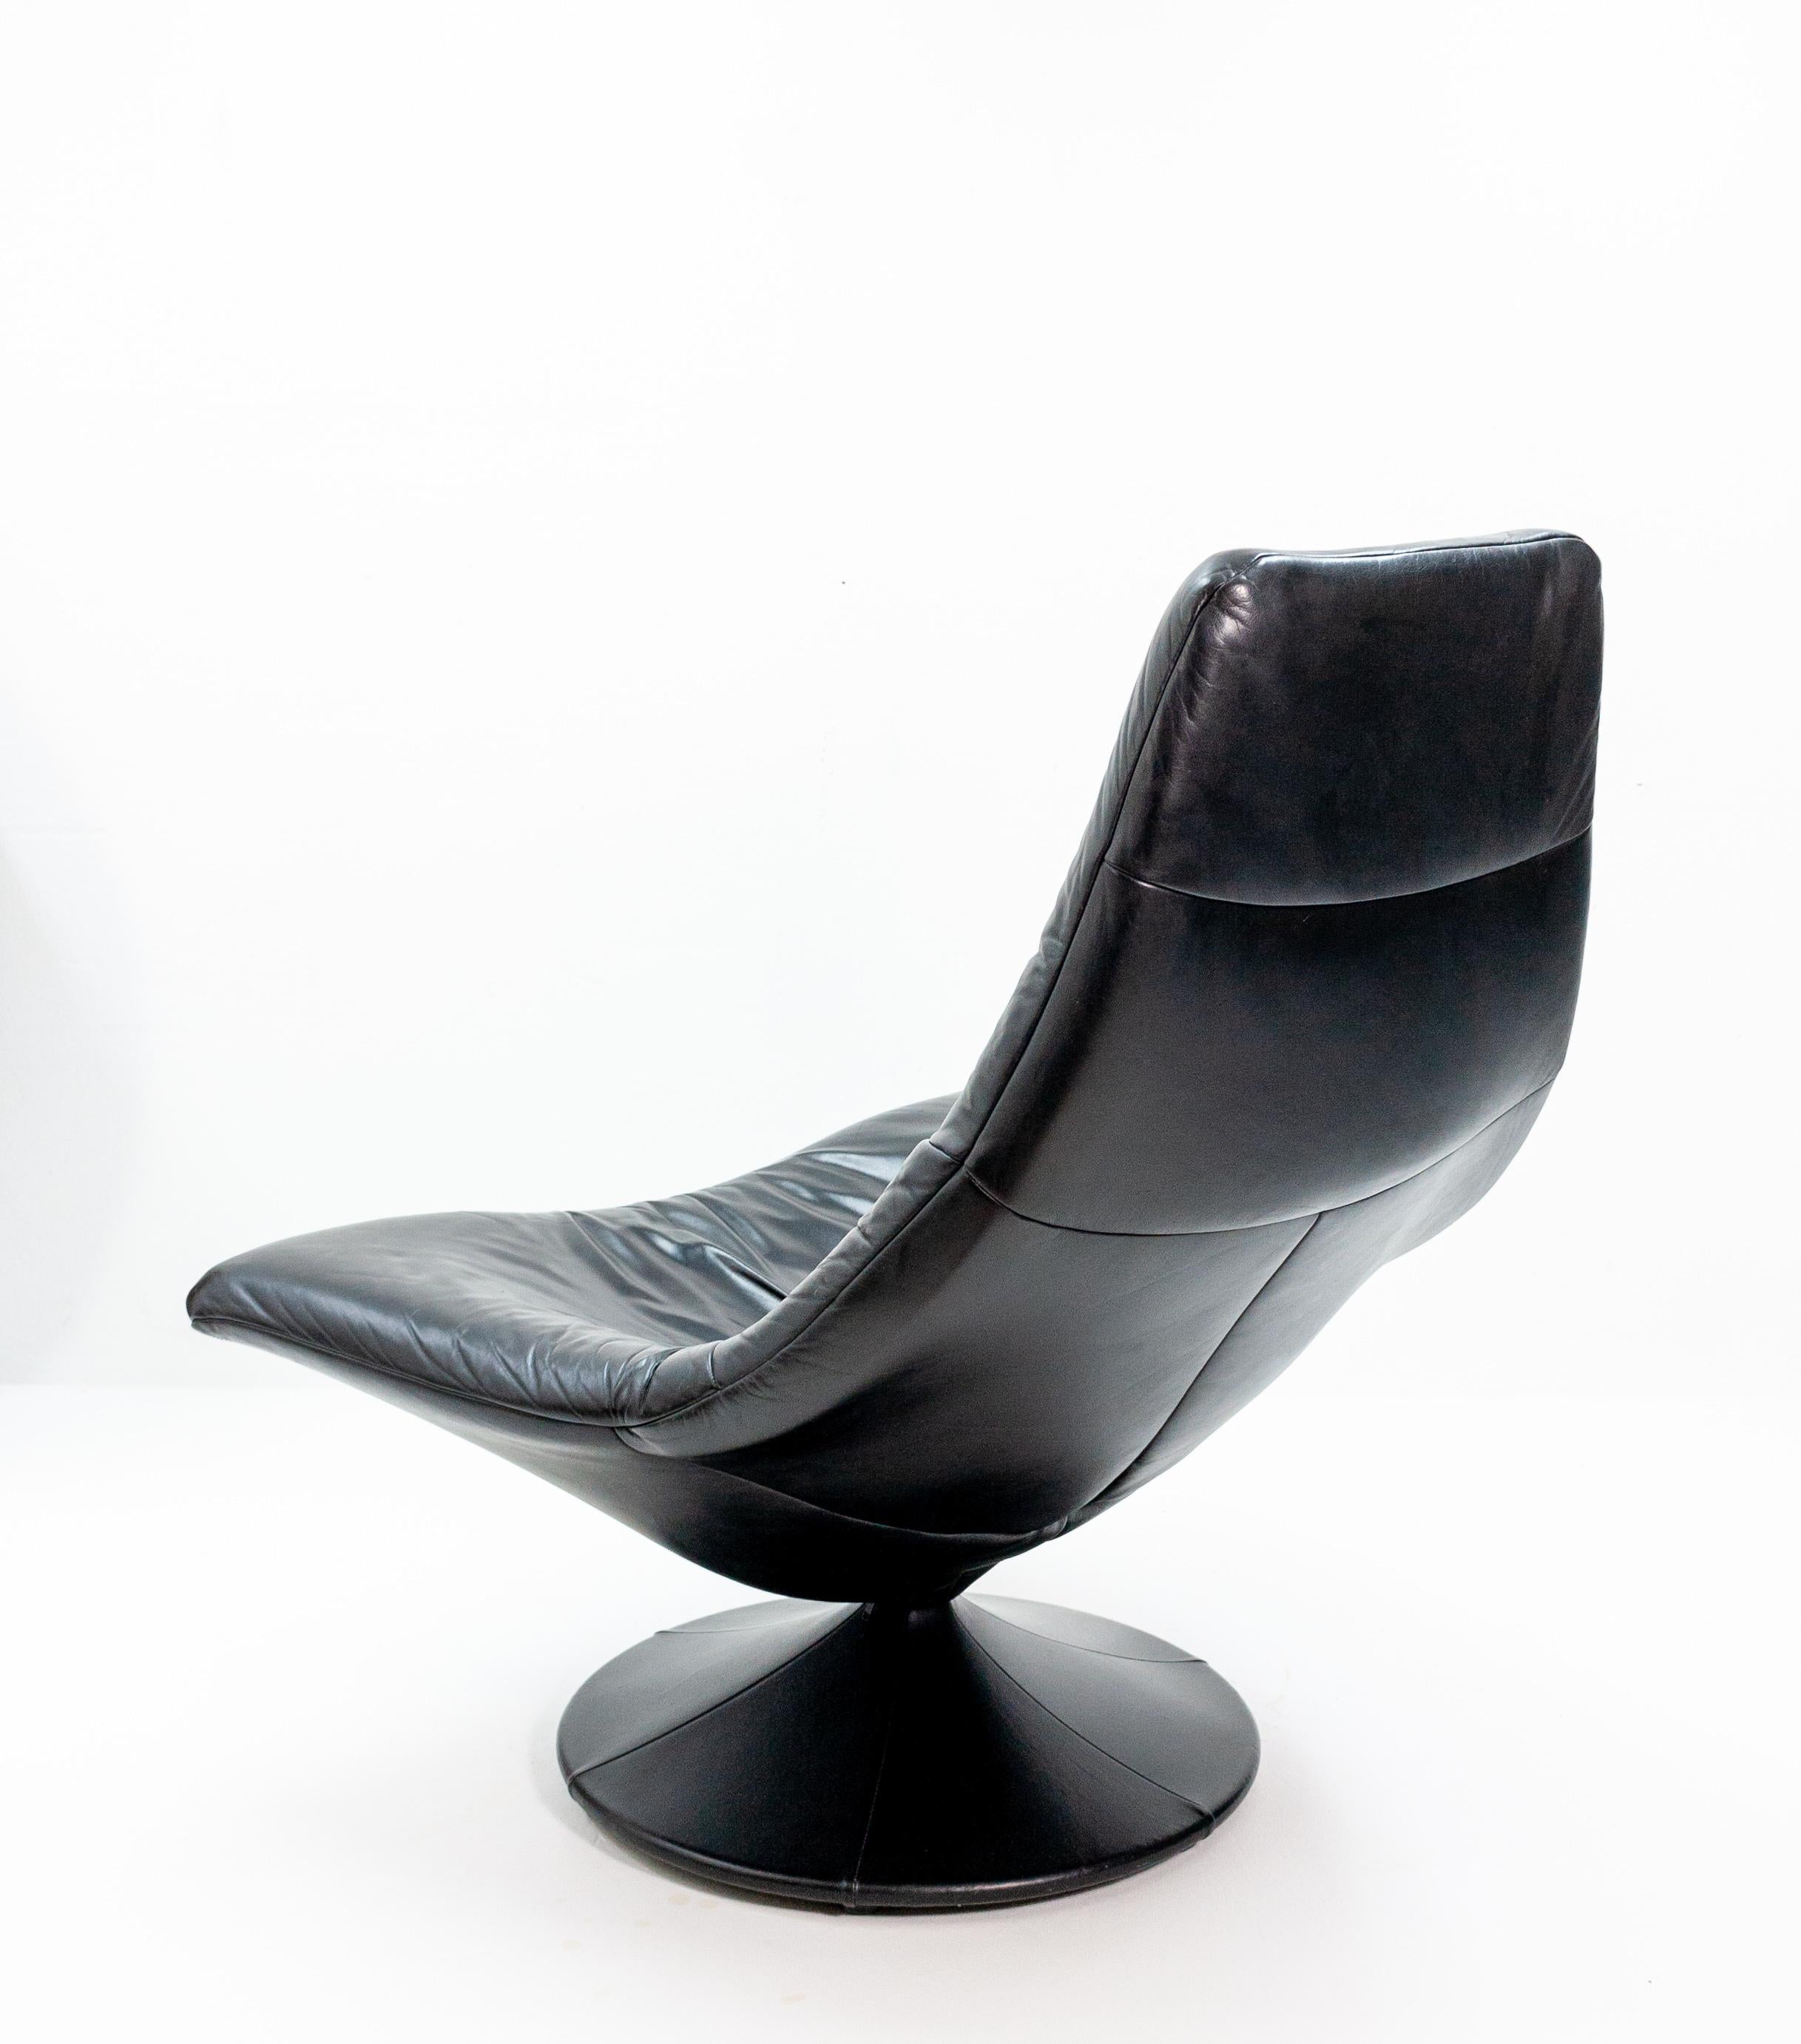 Beautifully shaped swiveling lounge chair. Designed by Gerard van der Berg. Made in Holland, 1970s, very nice condition.